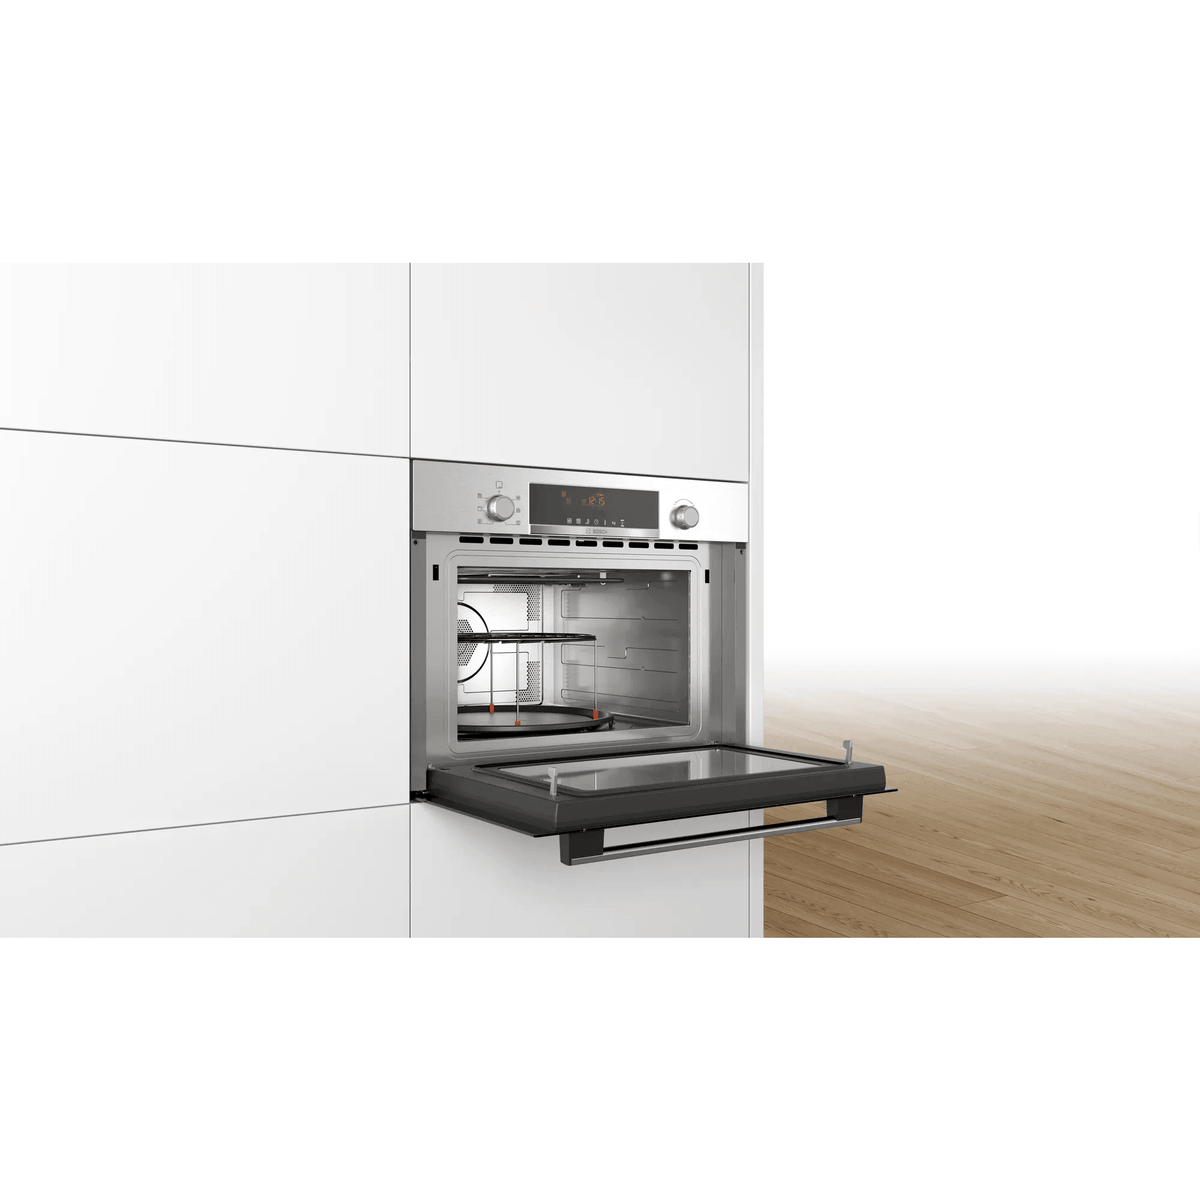 Bosch Serie 4 44L Built-In Microwave Oven with Hot Air - Stainless Steel | CMA583MS0B (7472771137724)